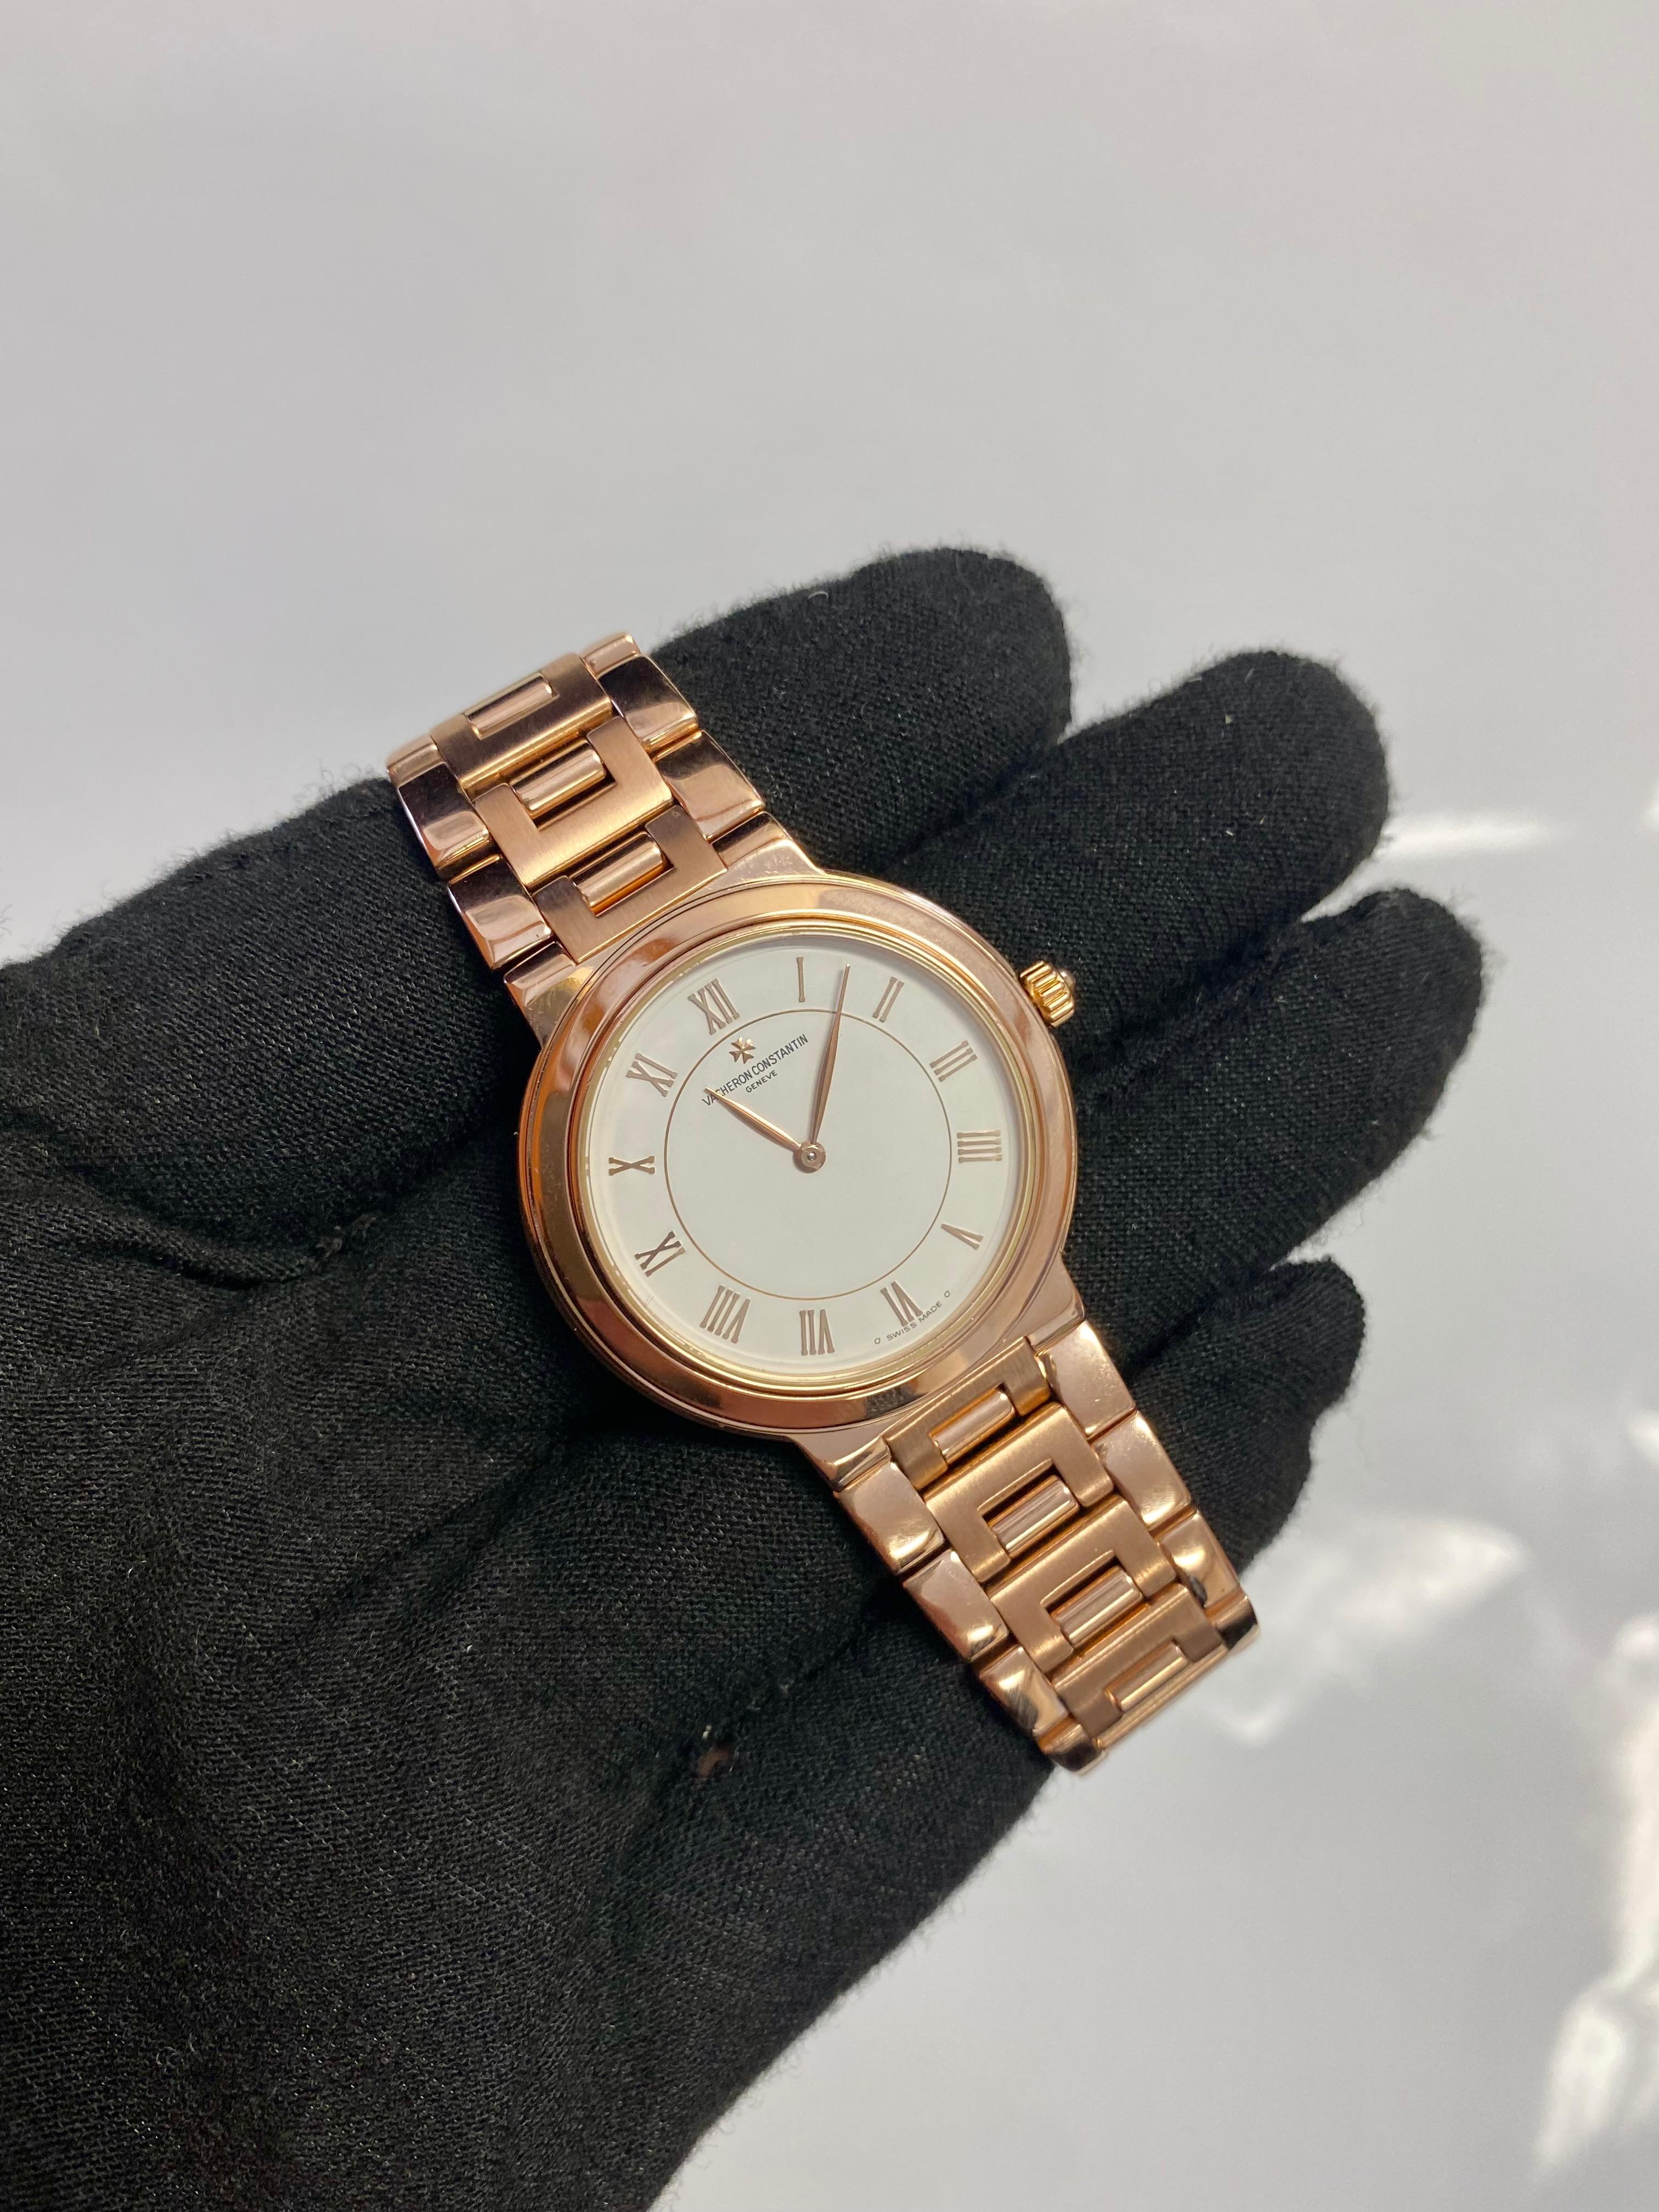 Vacheron Constantin Patrimony 18K Rose Gold Ultra ladies Watch 670852. Manual winding movement. 18K rose gold case 32 mm in diameter. Straight lugs. Thickness 5.5 mm. 18K rose gold fixed bezel. Scratch-resistant sapphire crystal. White dial with